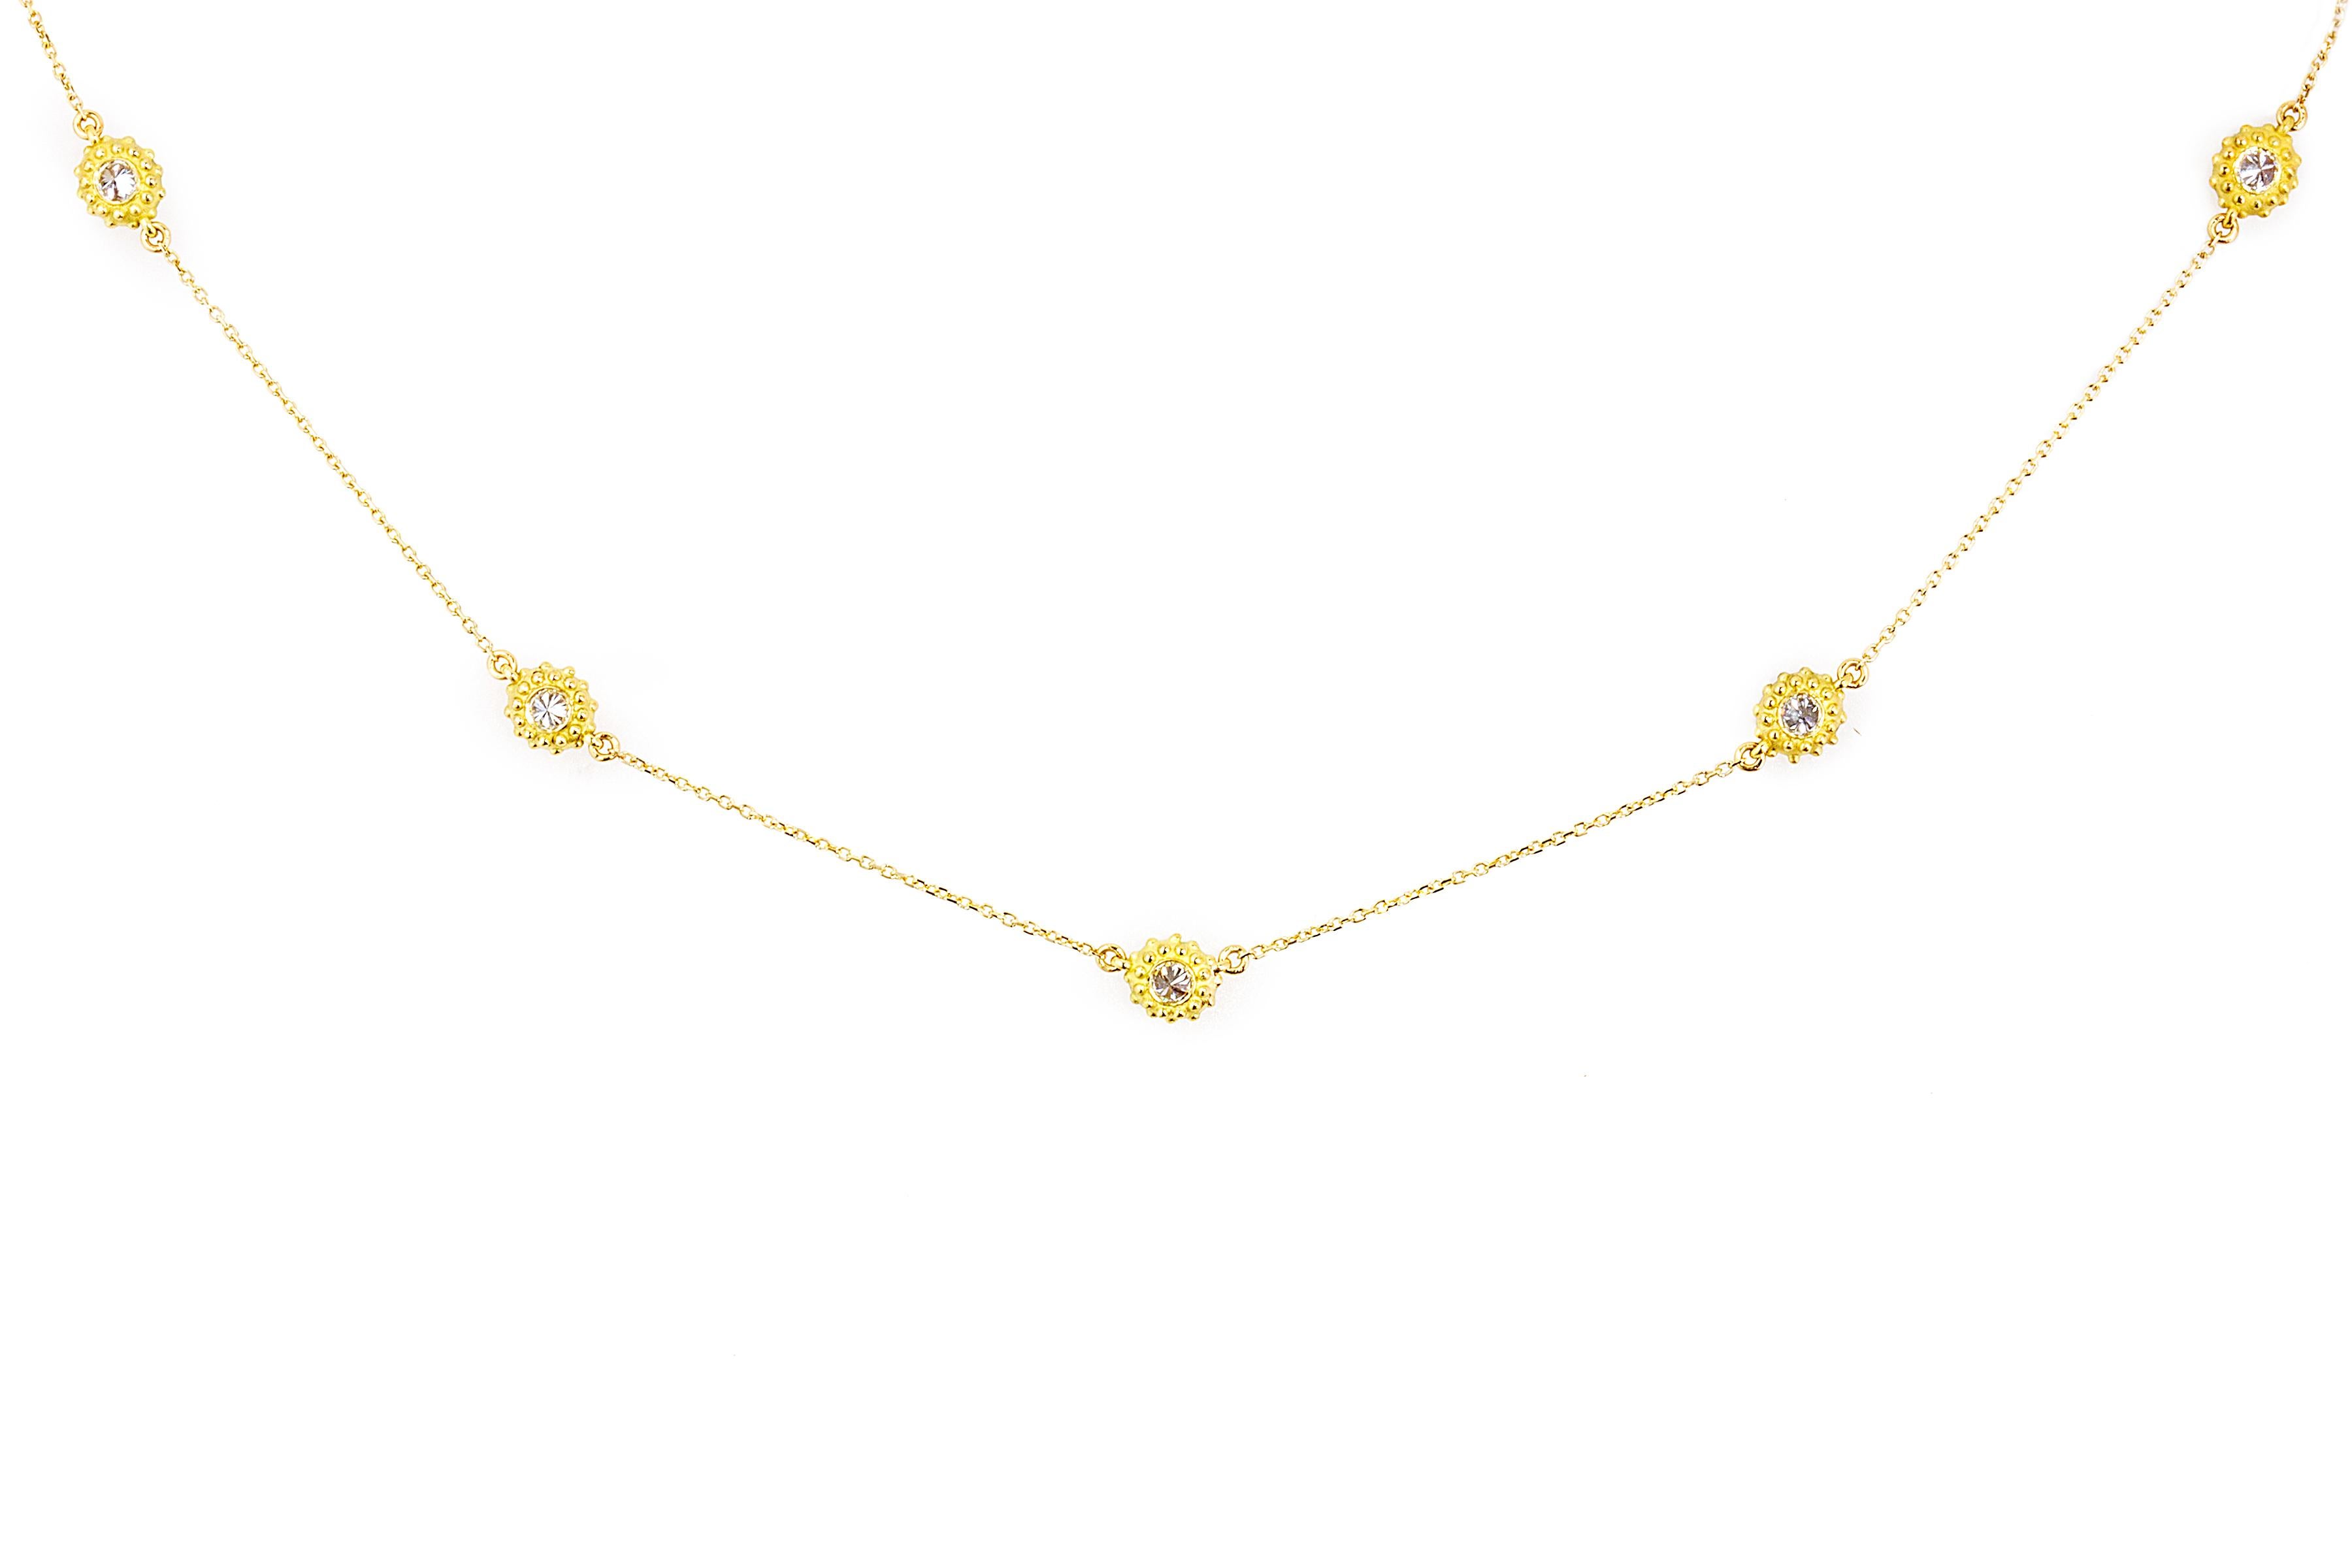 Contemporary AnaKatarina 18 Karat Yellow Gold and Diamond Sea Urchin 'Intuition' Necklace For Sale